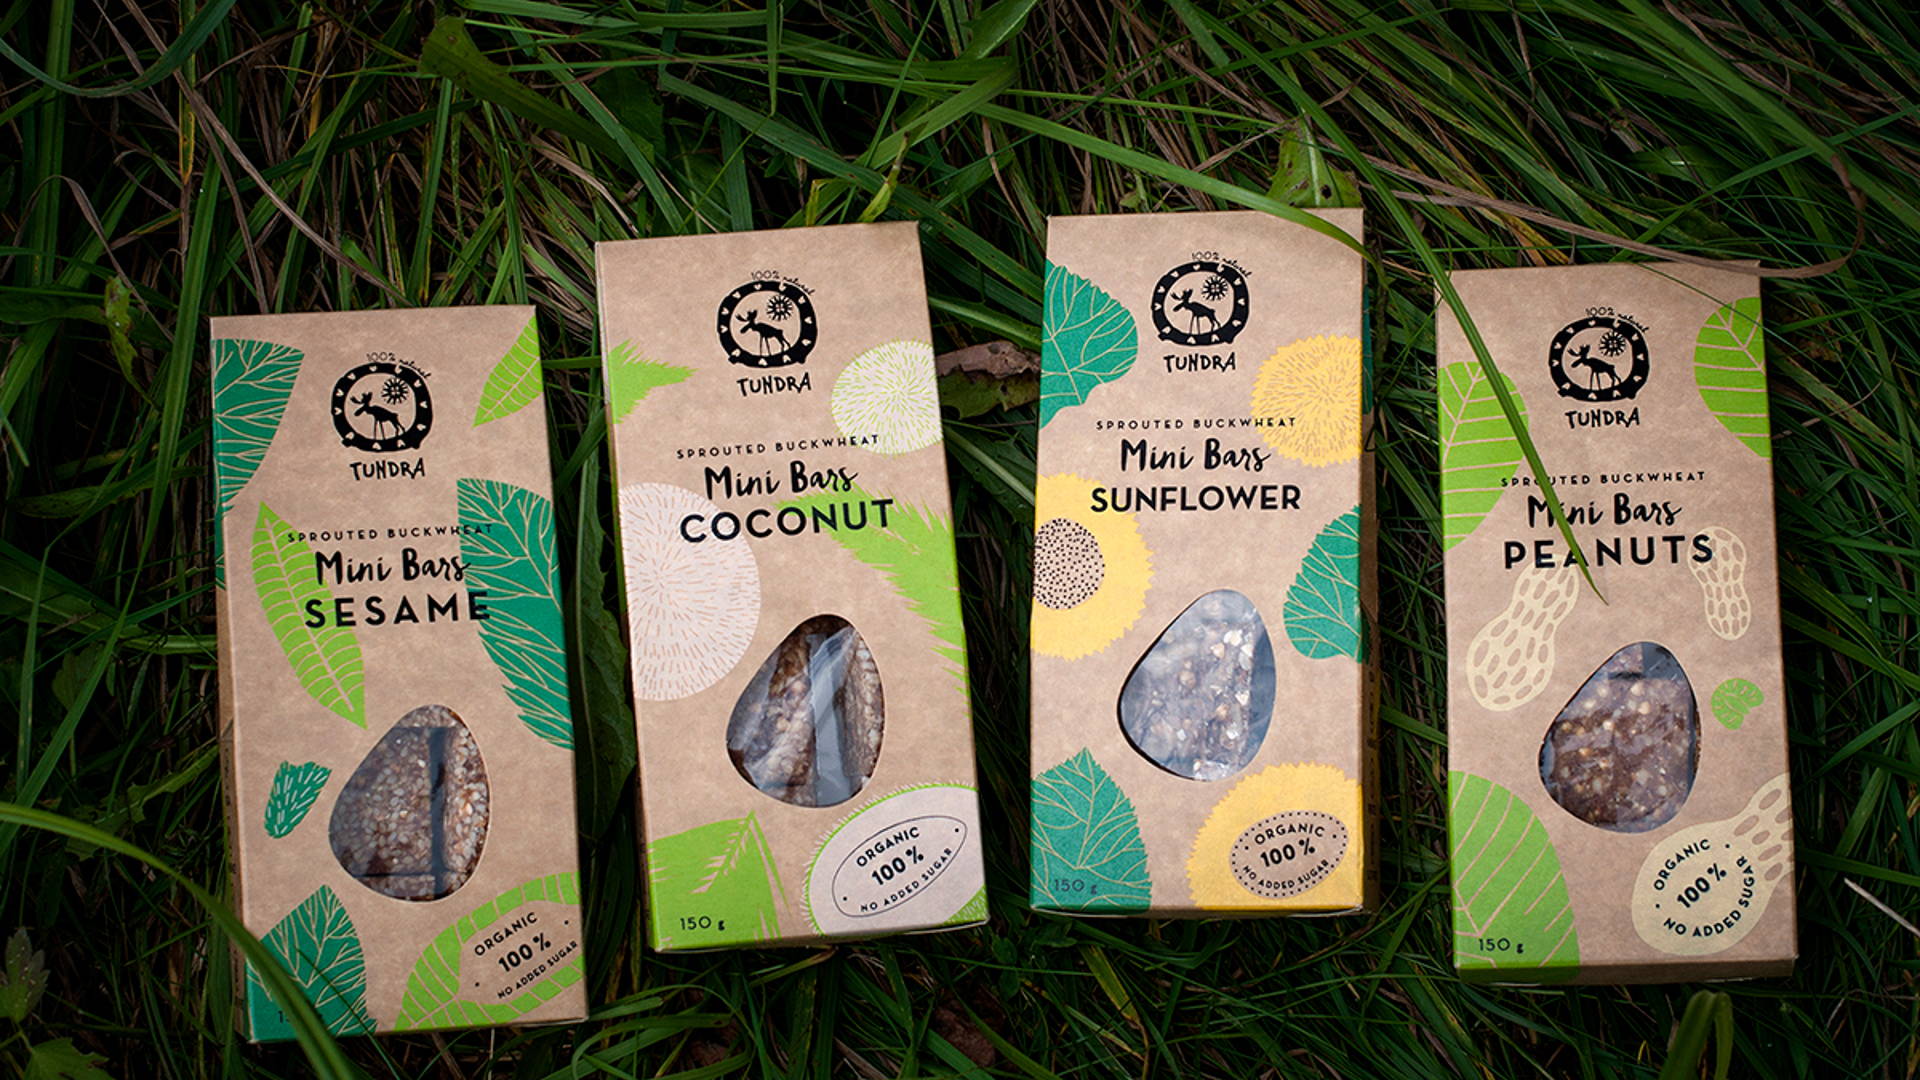 Featured image for The Packaging For These Healthy Snacks Reinforce a Natural Organic Feeling